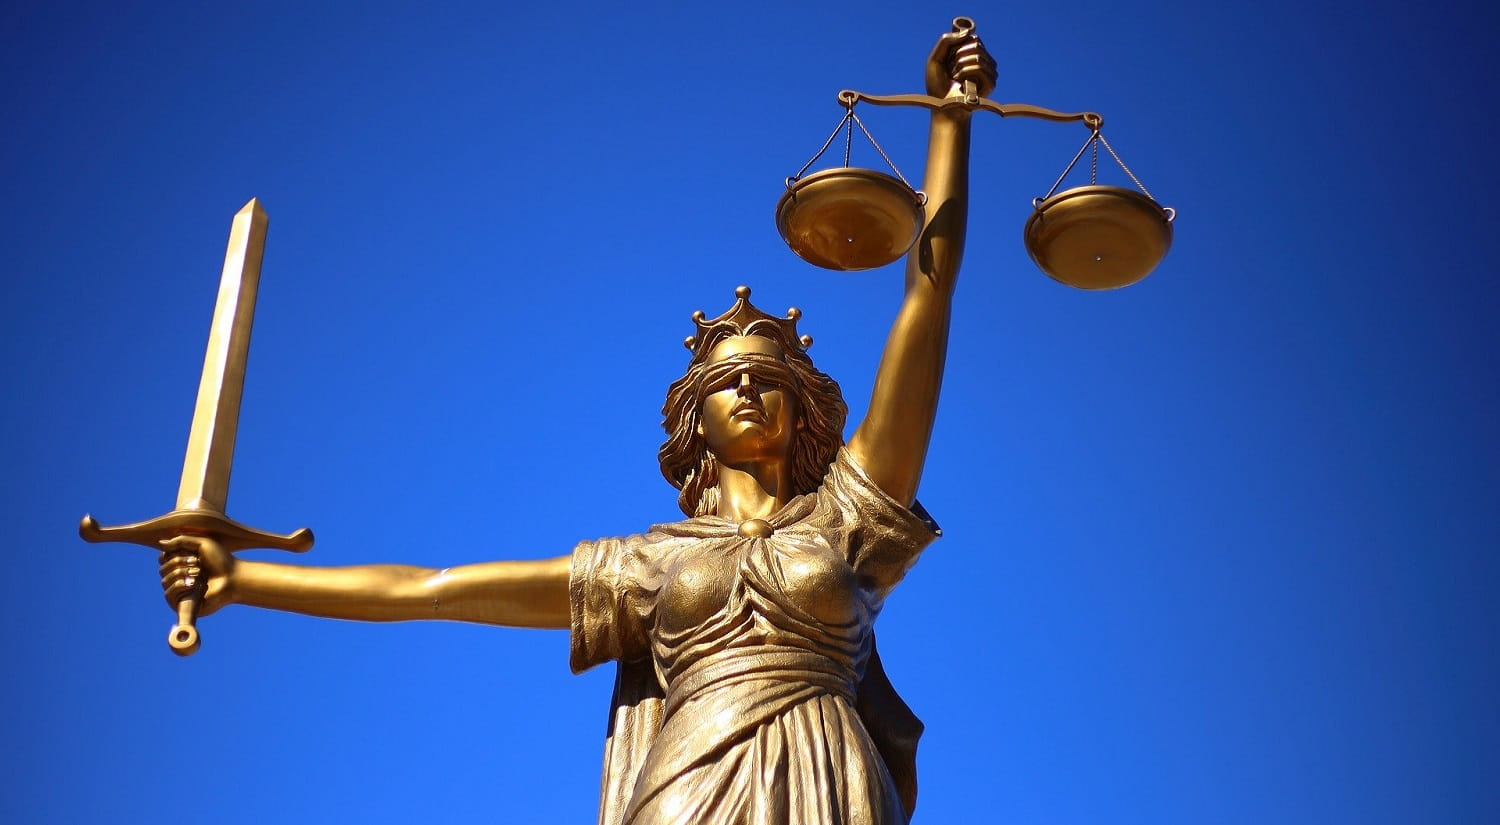 A bronze statue of justice with a clear blue sky in the background.